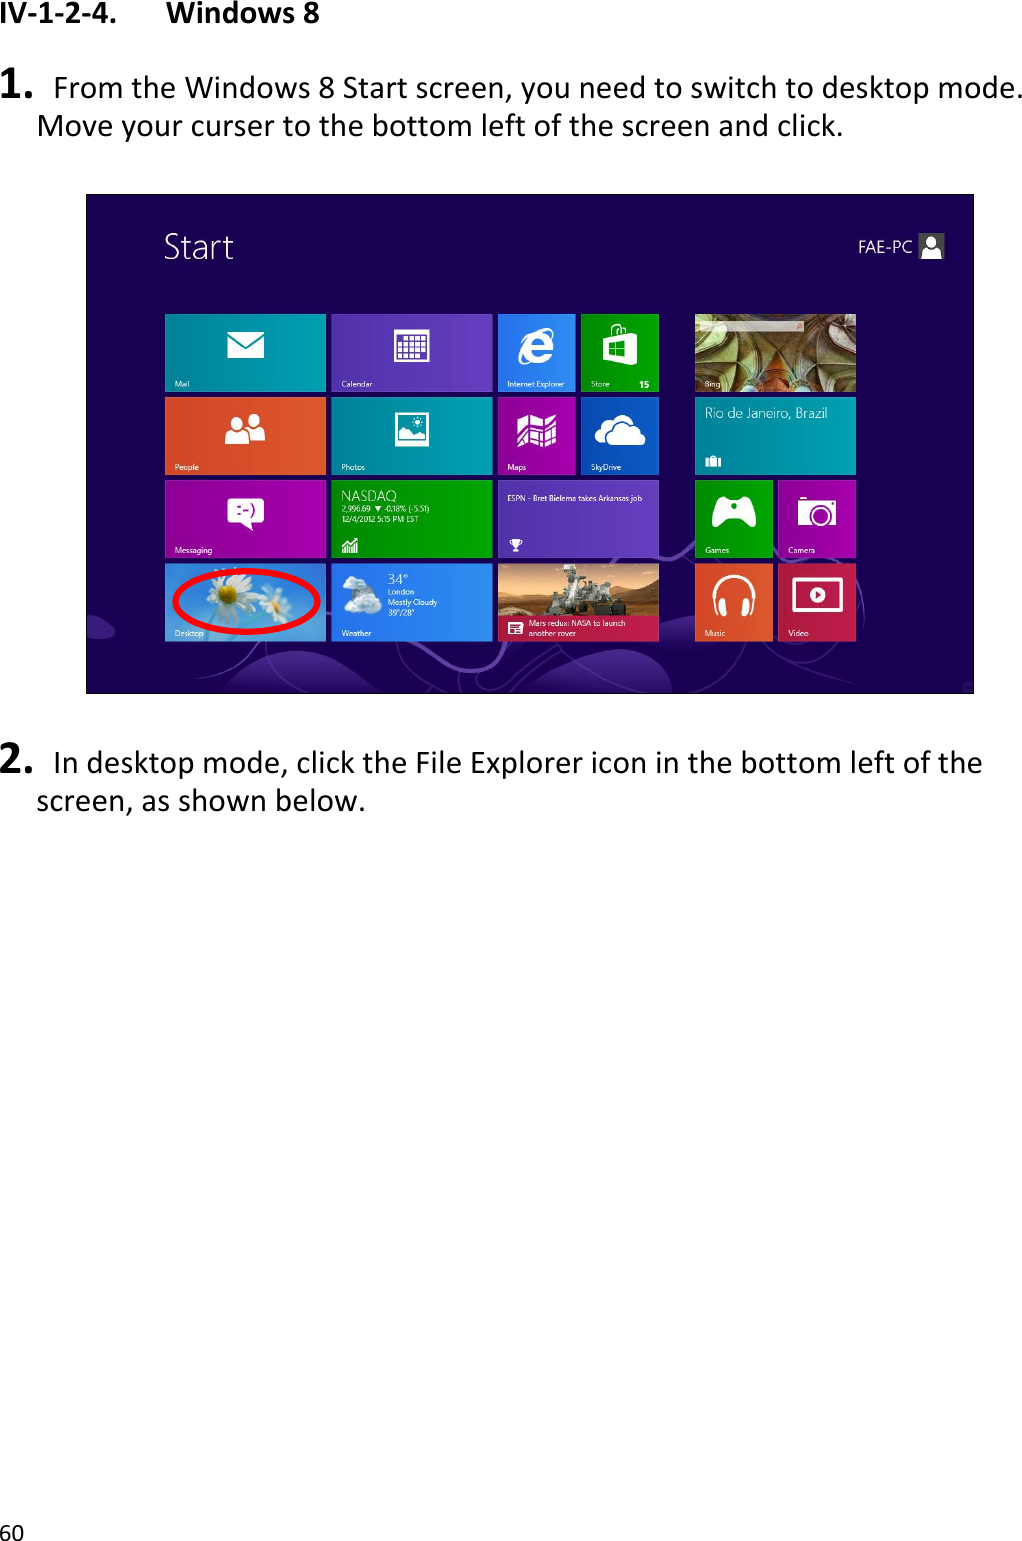 60  IV-1-2-4.    Windows 8  1.   From the Windows 8 Start screen, you need to switch to desktop mode. Move your curser to the bottom left of the screen and click.    2.   In desktop mode, click the File Explorer icon in the bottom left of the screen, as shown below.  